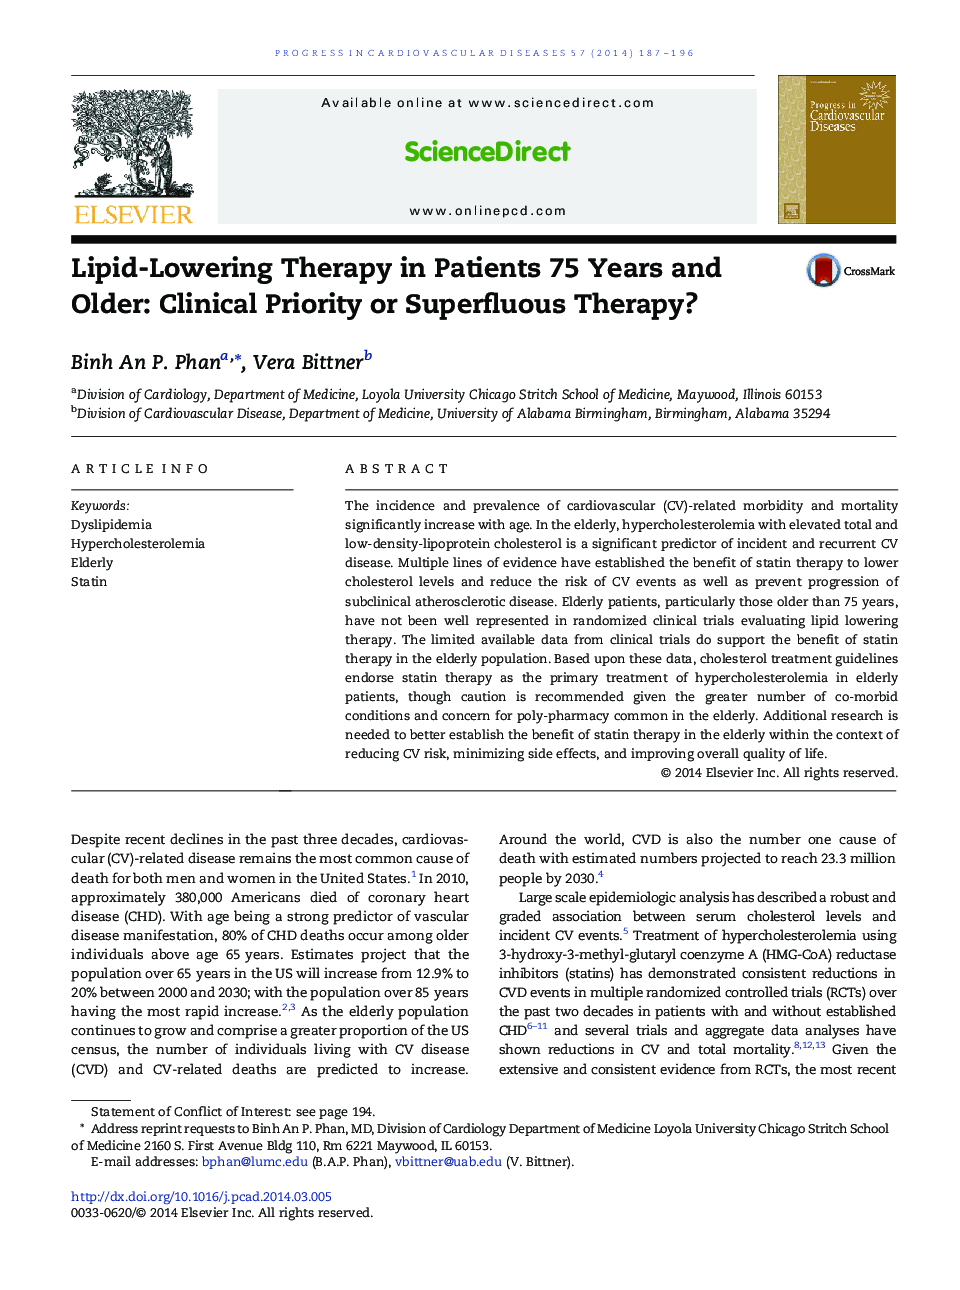 Lipid-Lowering Therapy in Patients 75 Years and Older: Clinical Priority or Superfluous Therapy? 